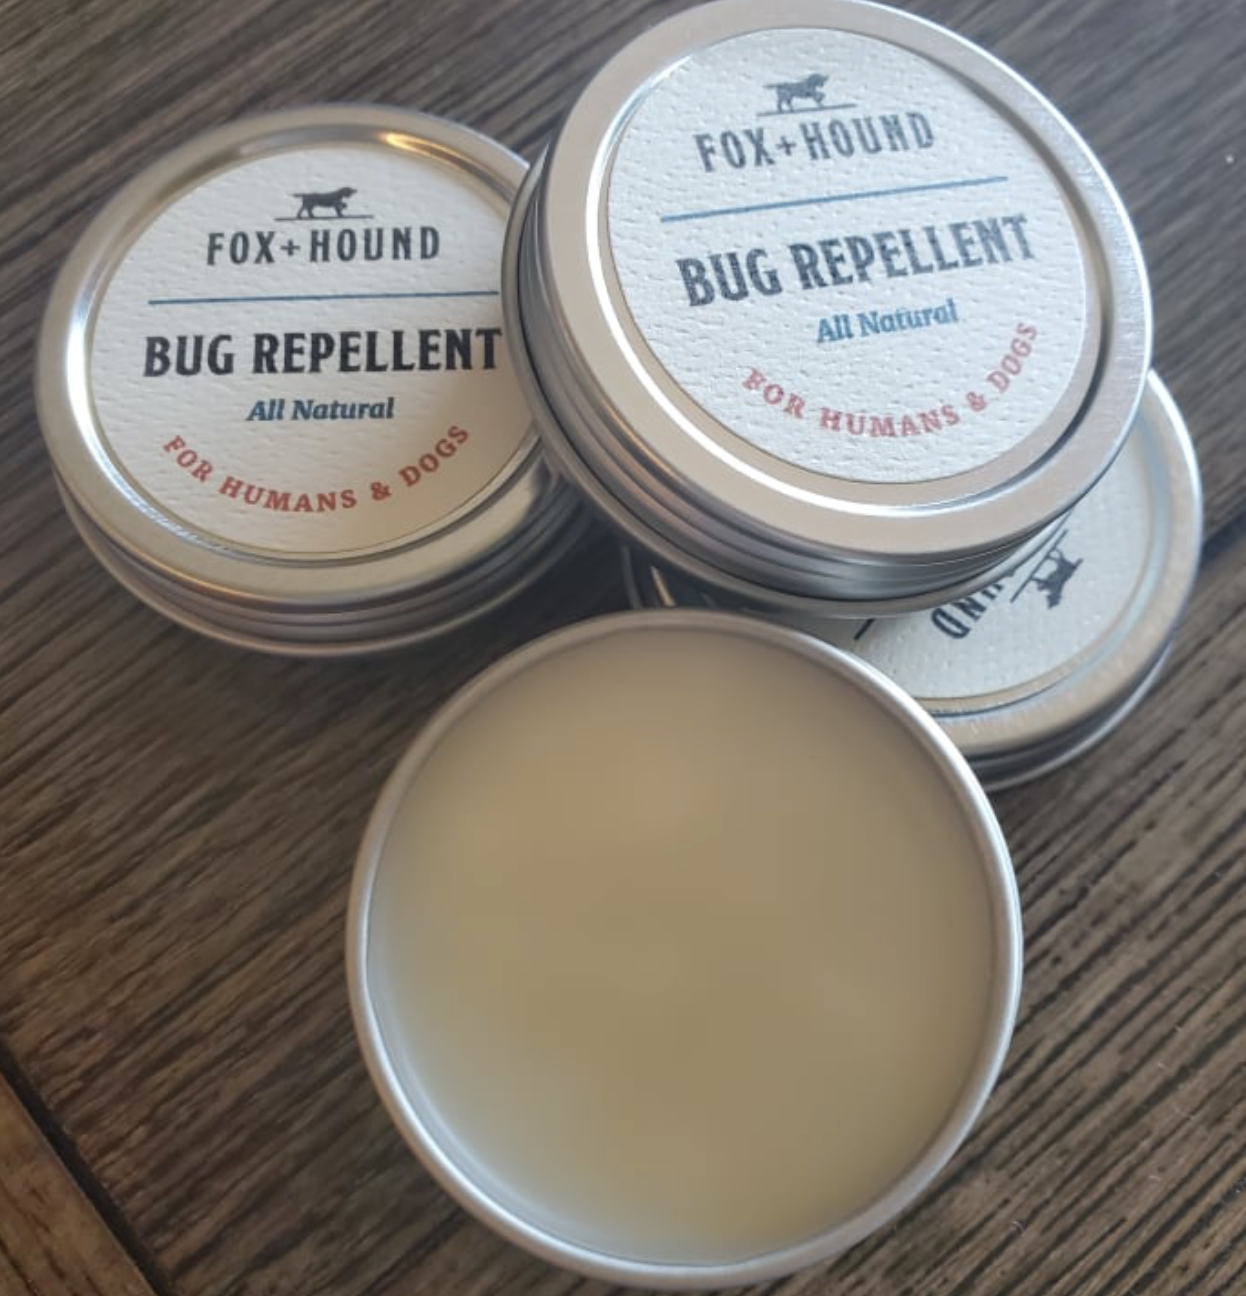 Fox + Hound All Natural Bug Repellent Balm for Humans and Dogs